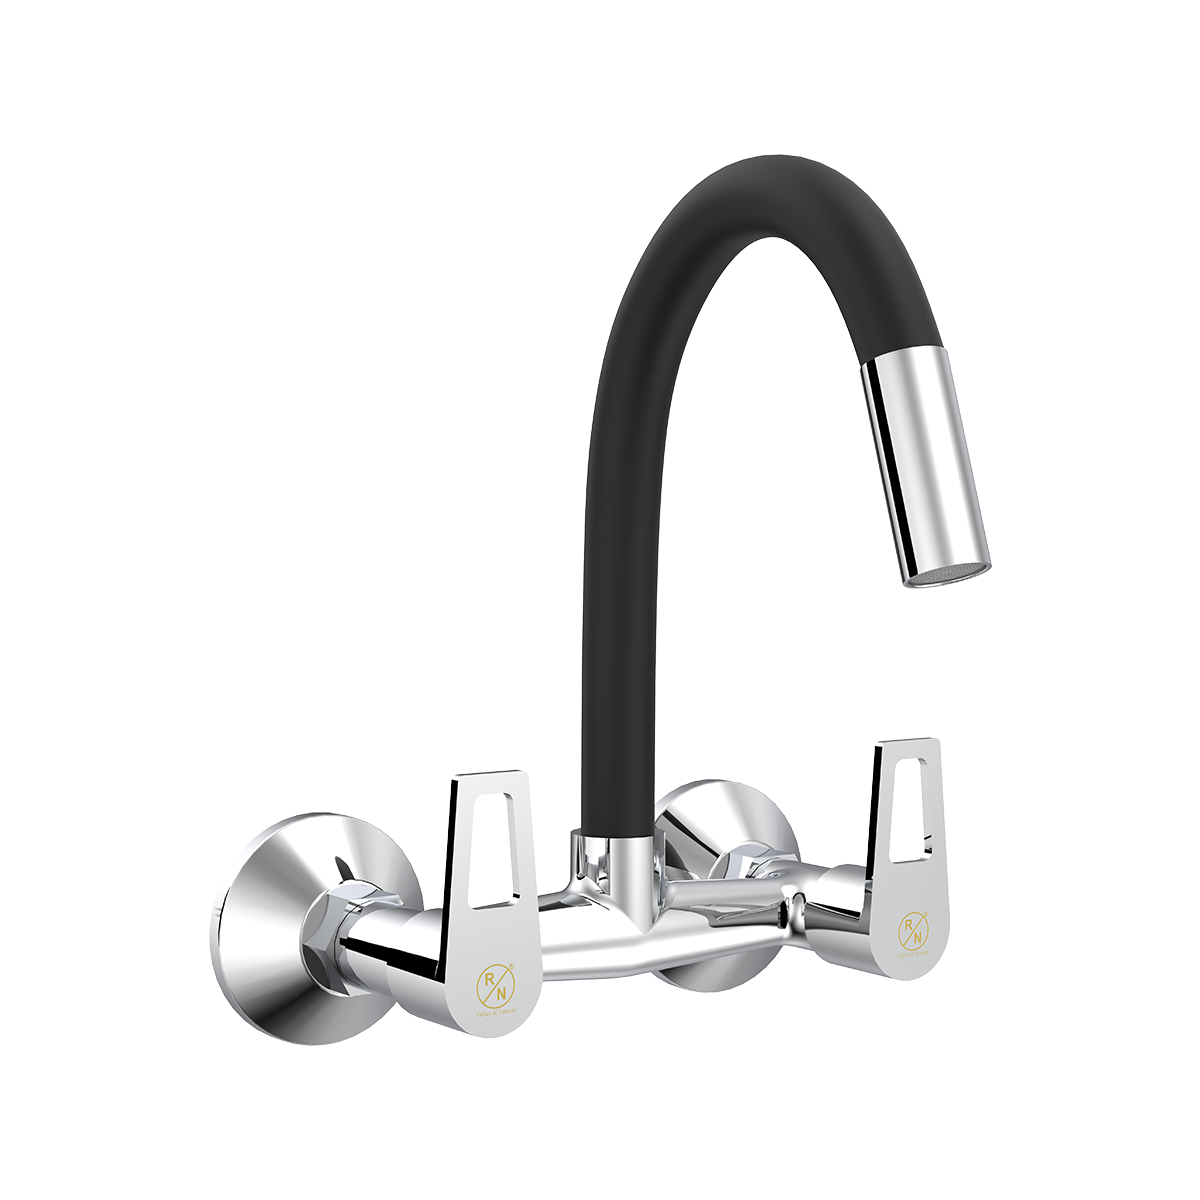 Wall Mounted Sink Mixer With Swivel Flexible Spout